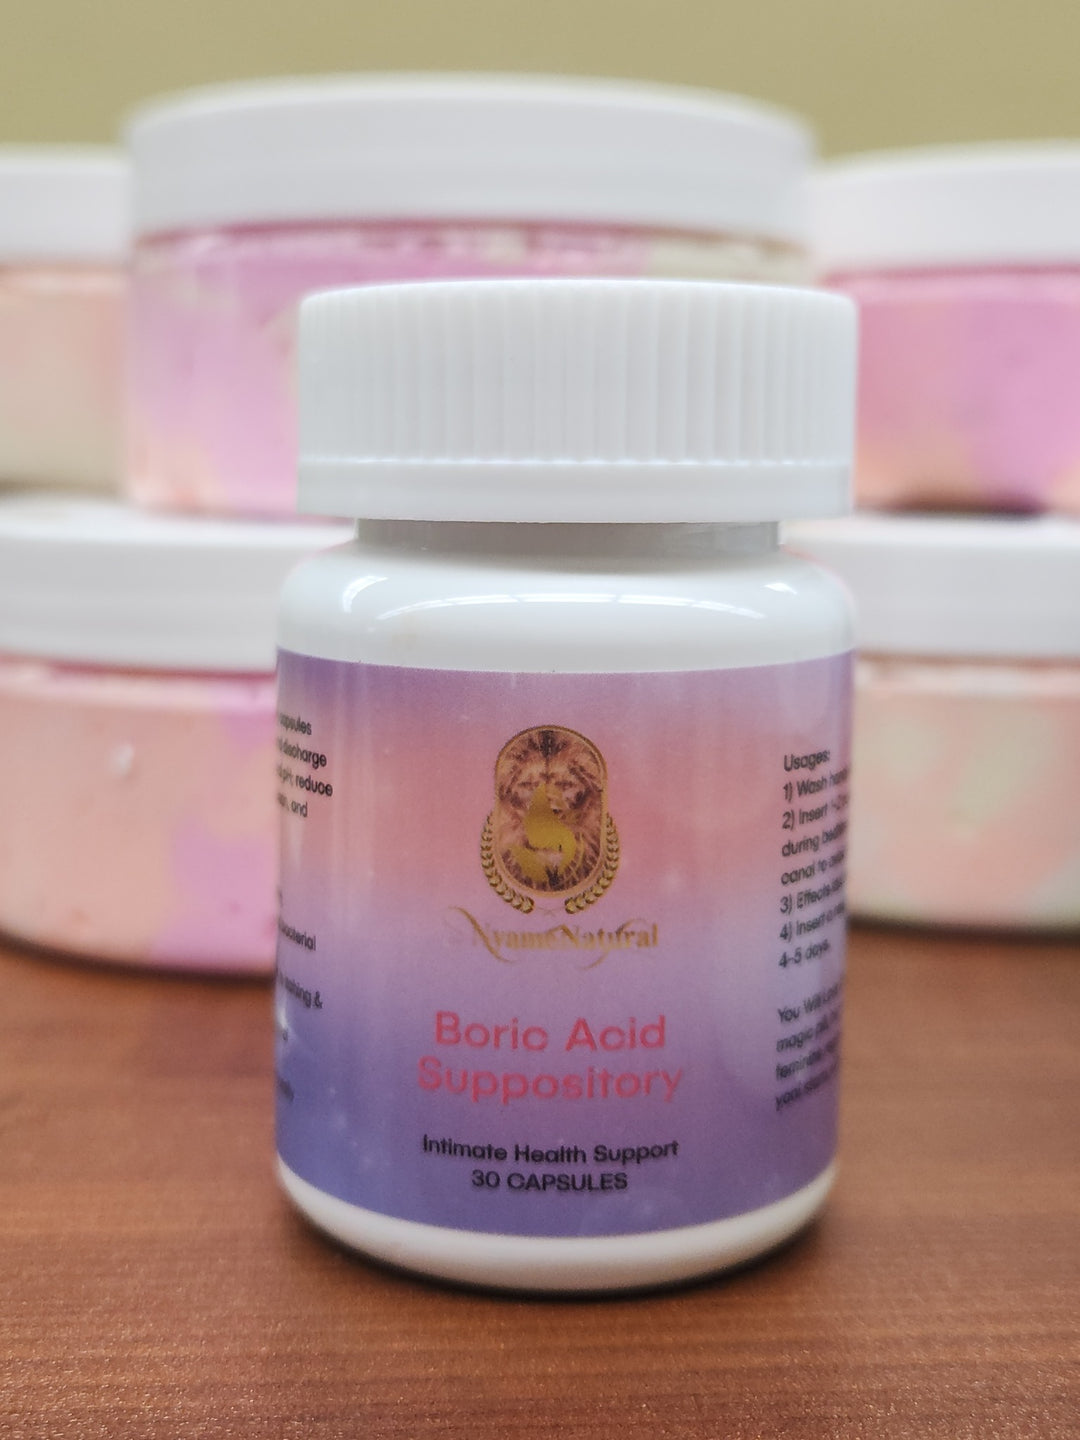 Boric Acid Suppository: A Promising Solution for Feminine Health